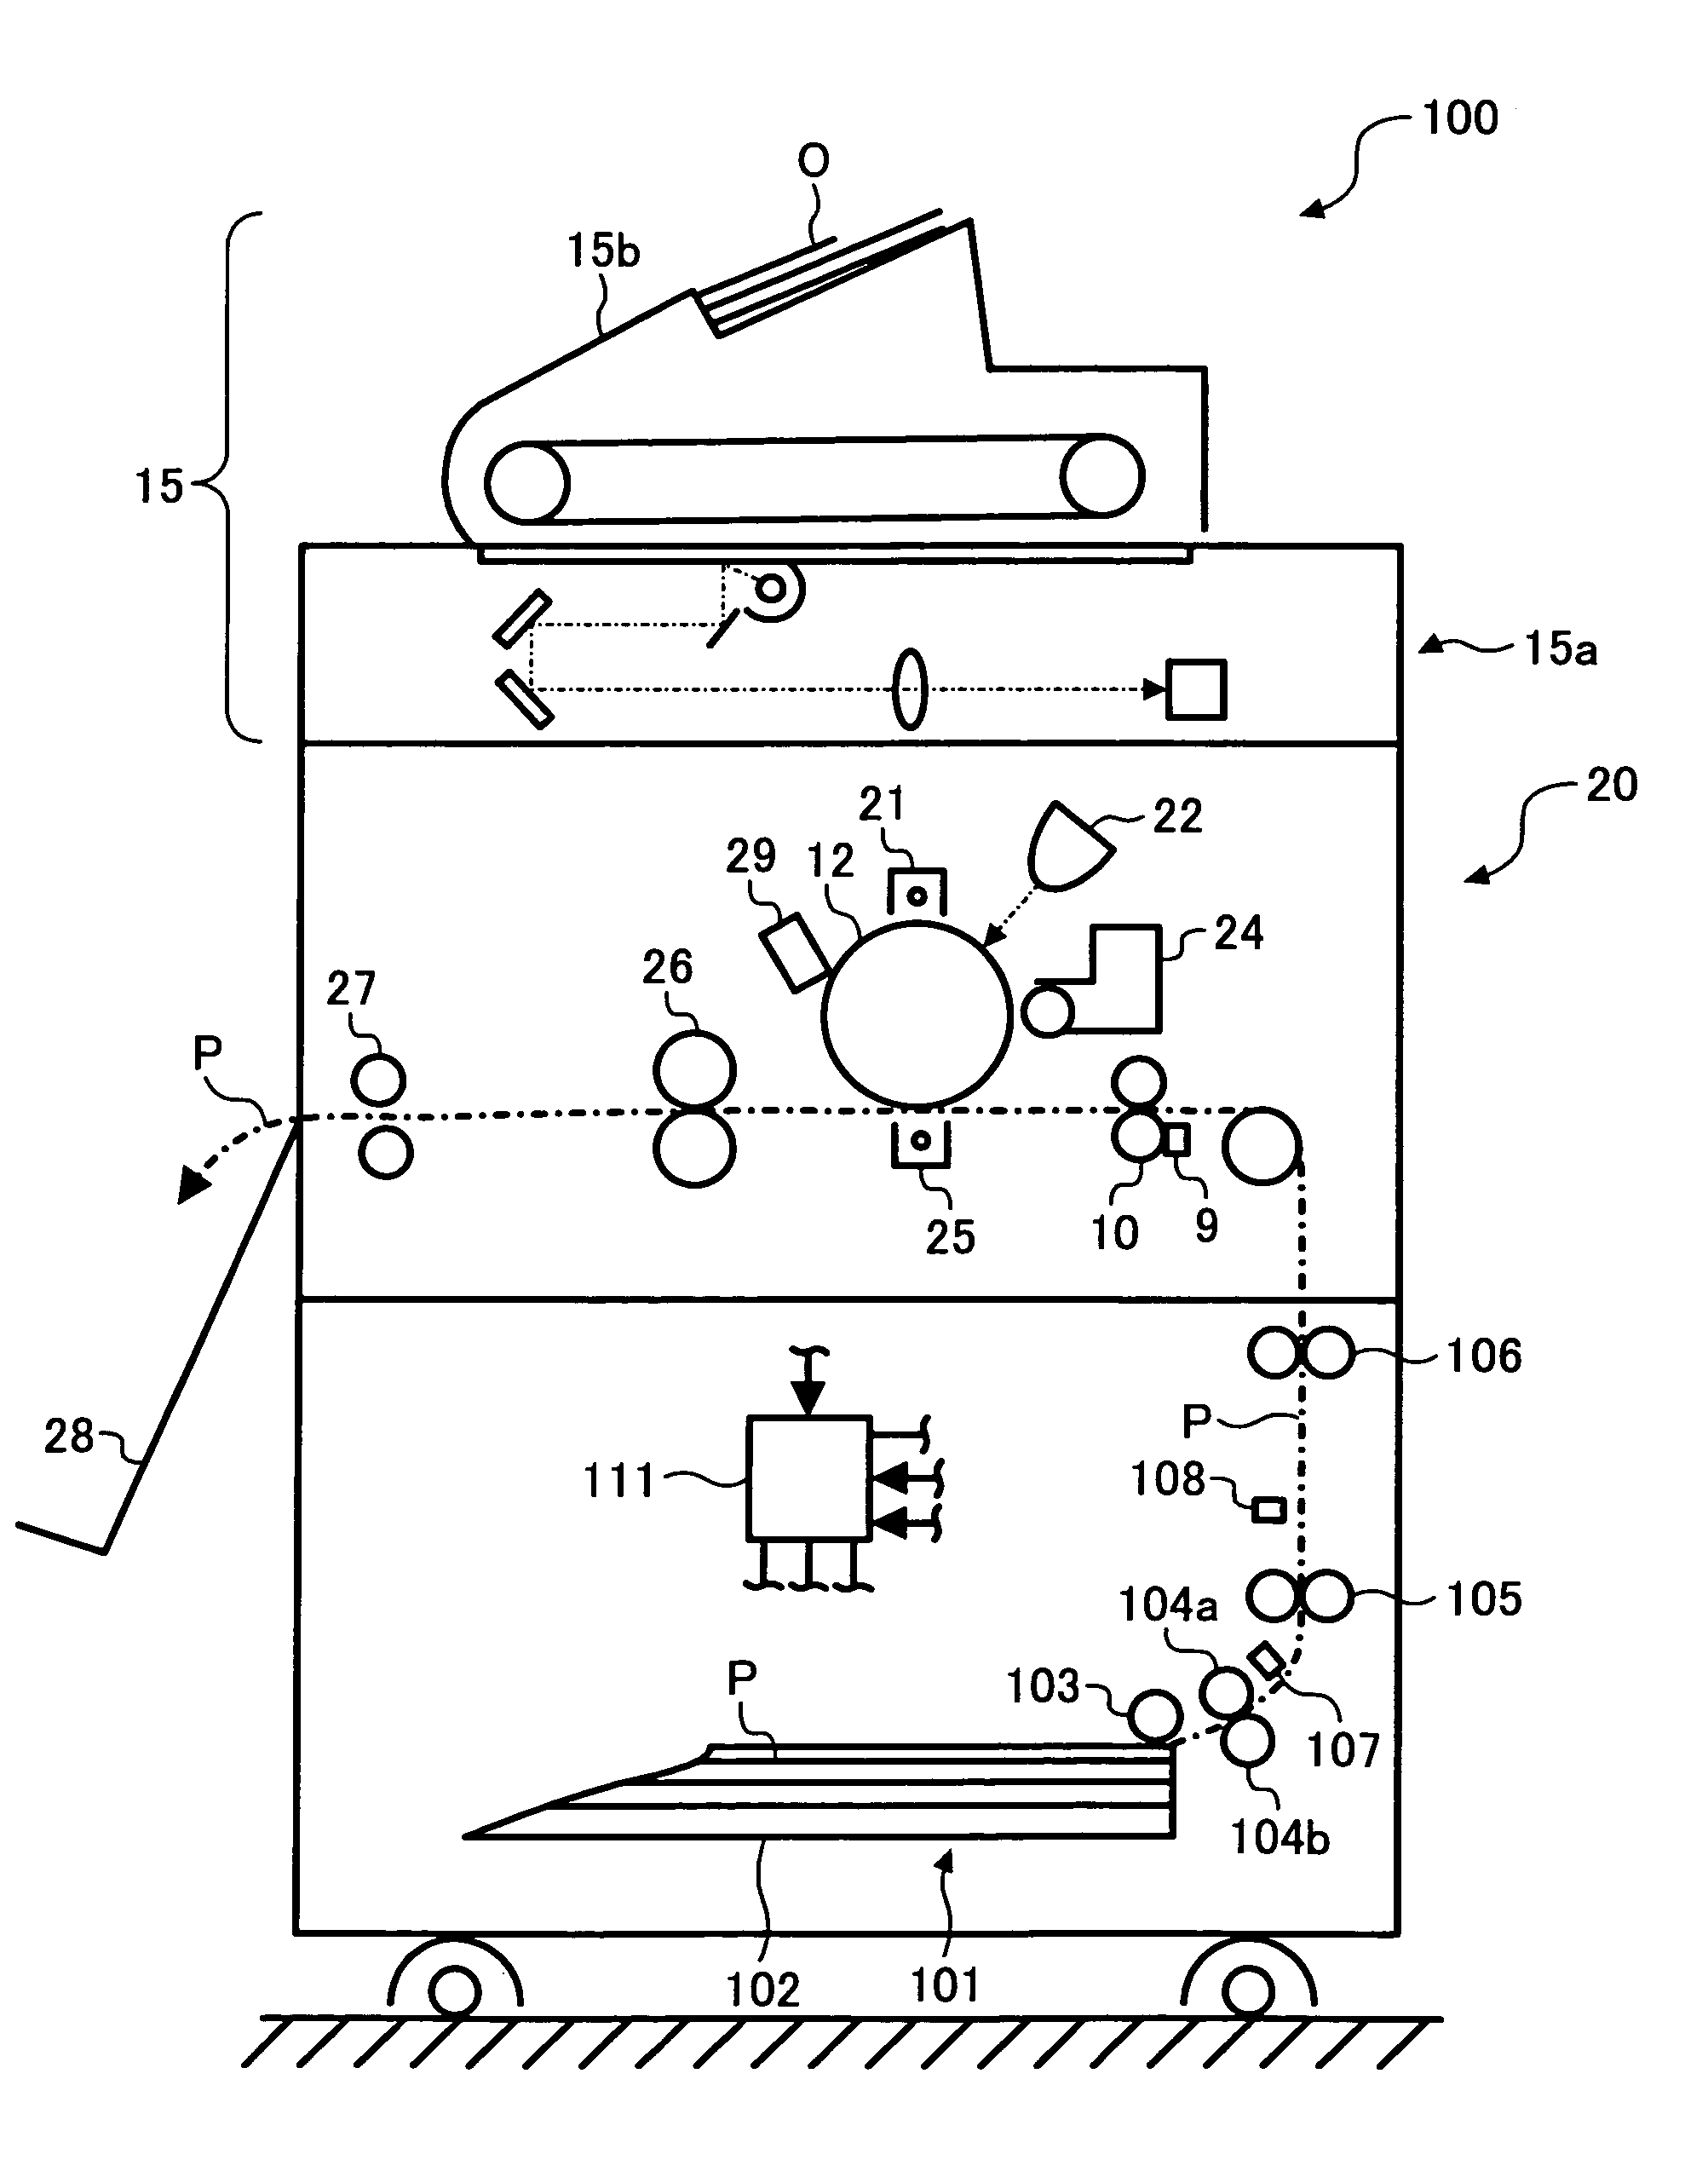 Method and apparatus for image forming capable of performing fast and stable sheet transfer operations